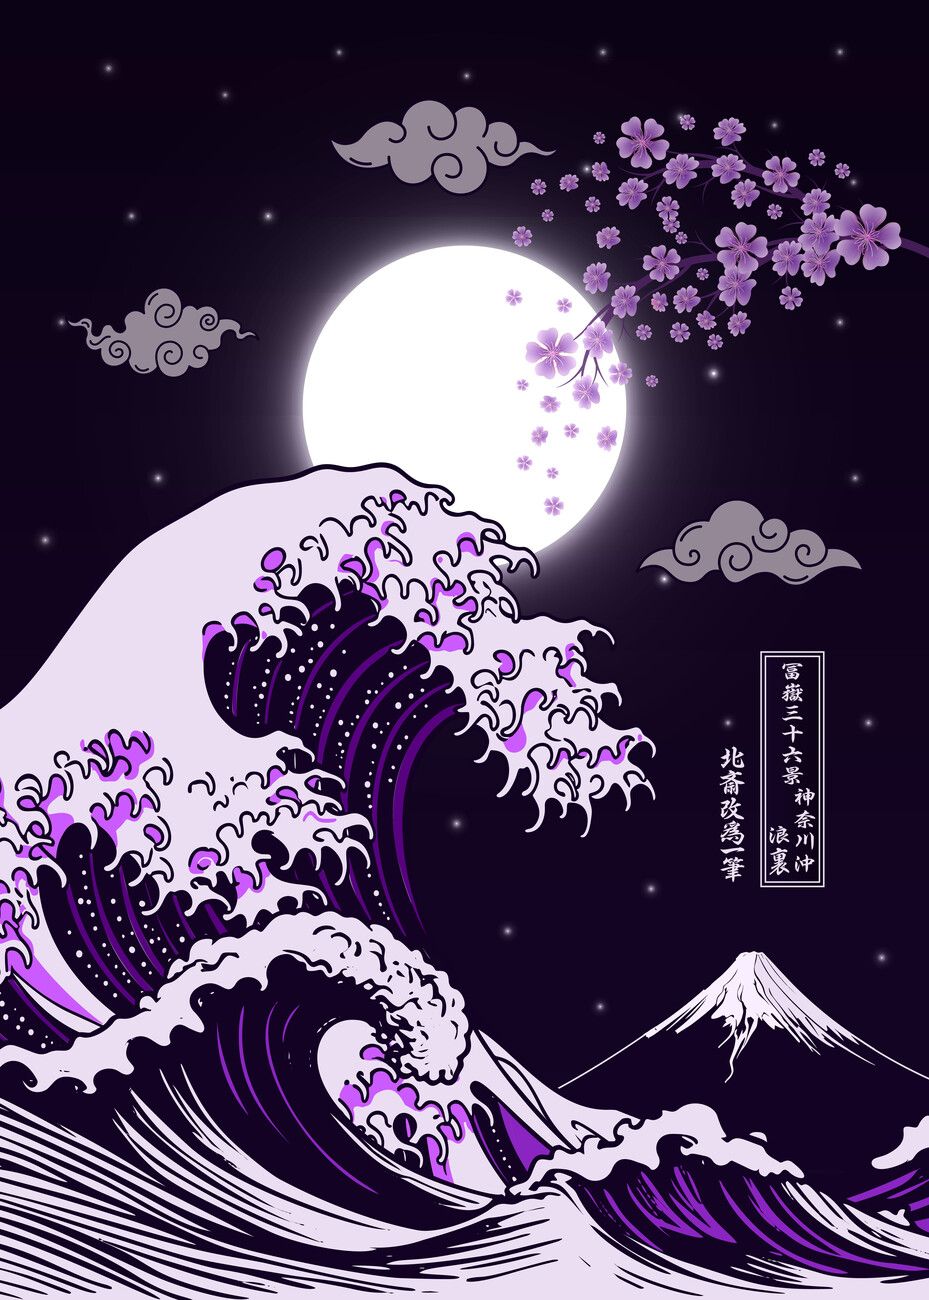 A purple and black illustration of a wave - The Great Wave off Kanagawa